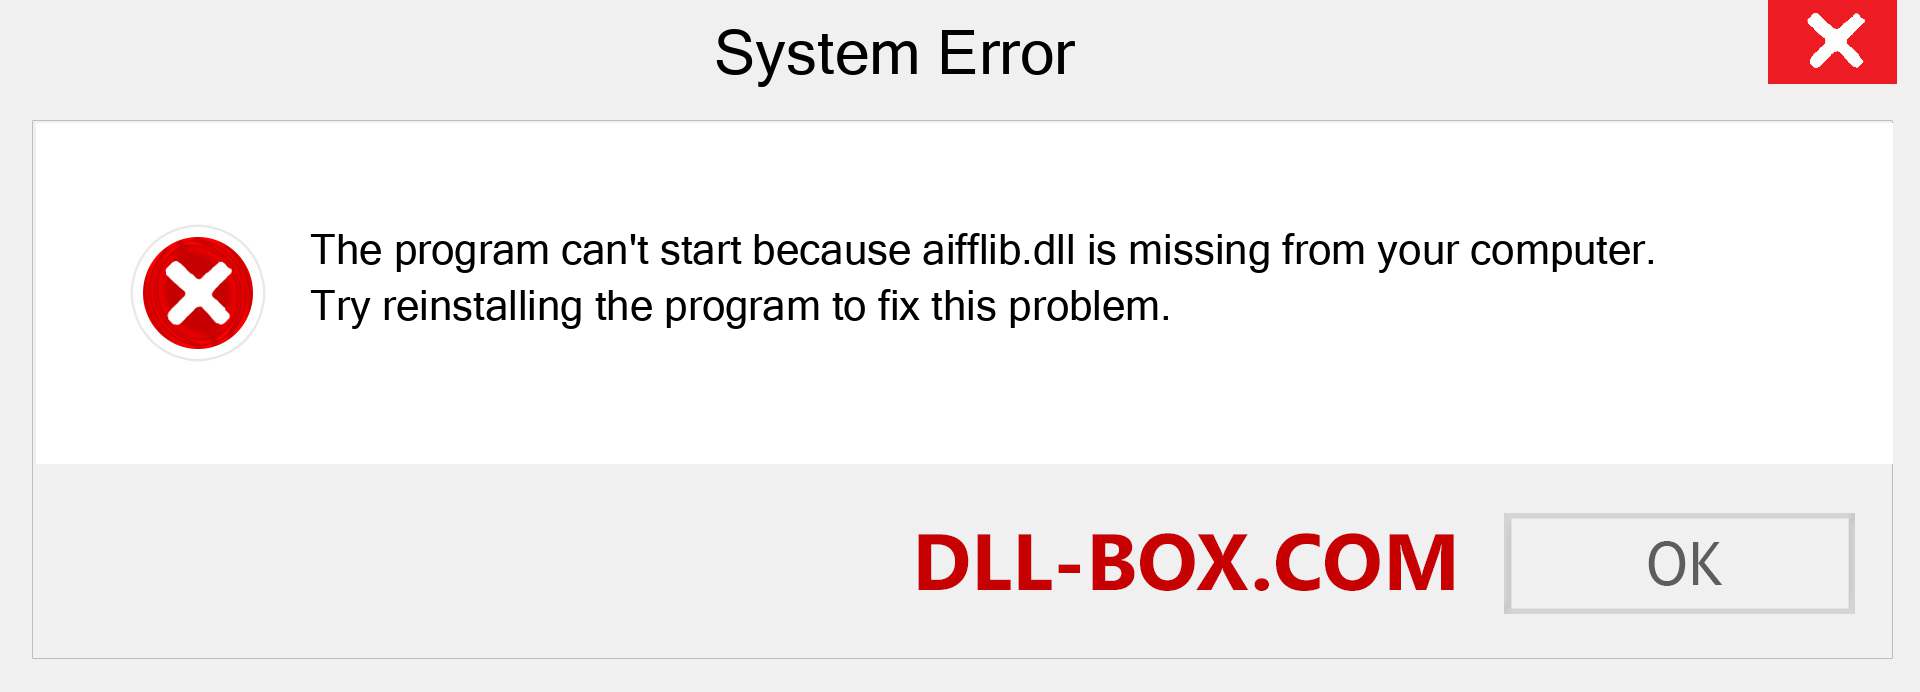  aifflib.dll file is missing?. Download for Windows 7, 8, 10 - Fix  aifflib dll Missing Error on Windows, photos, images